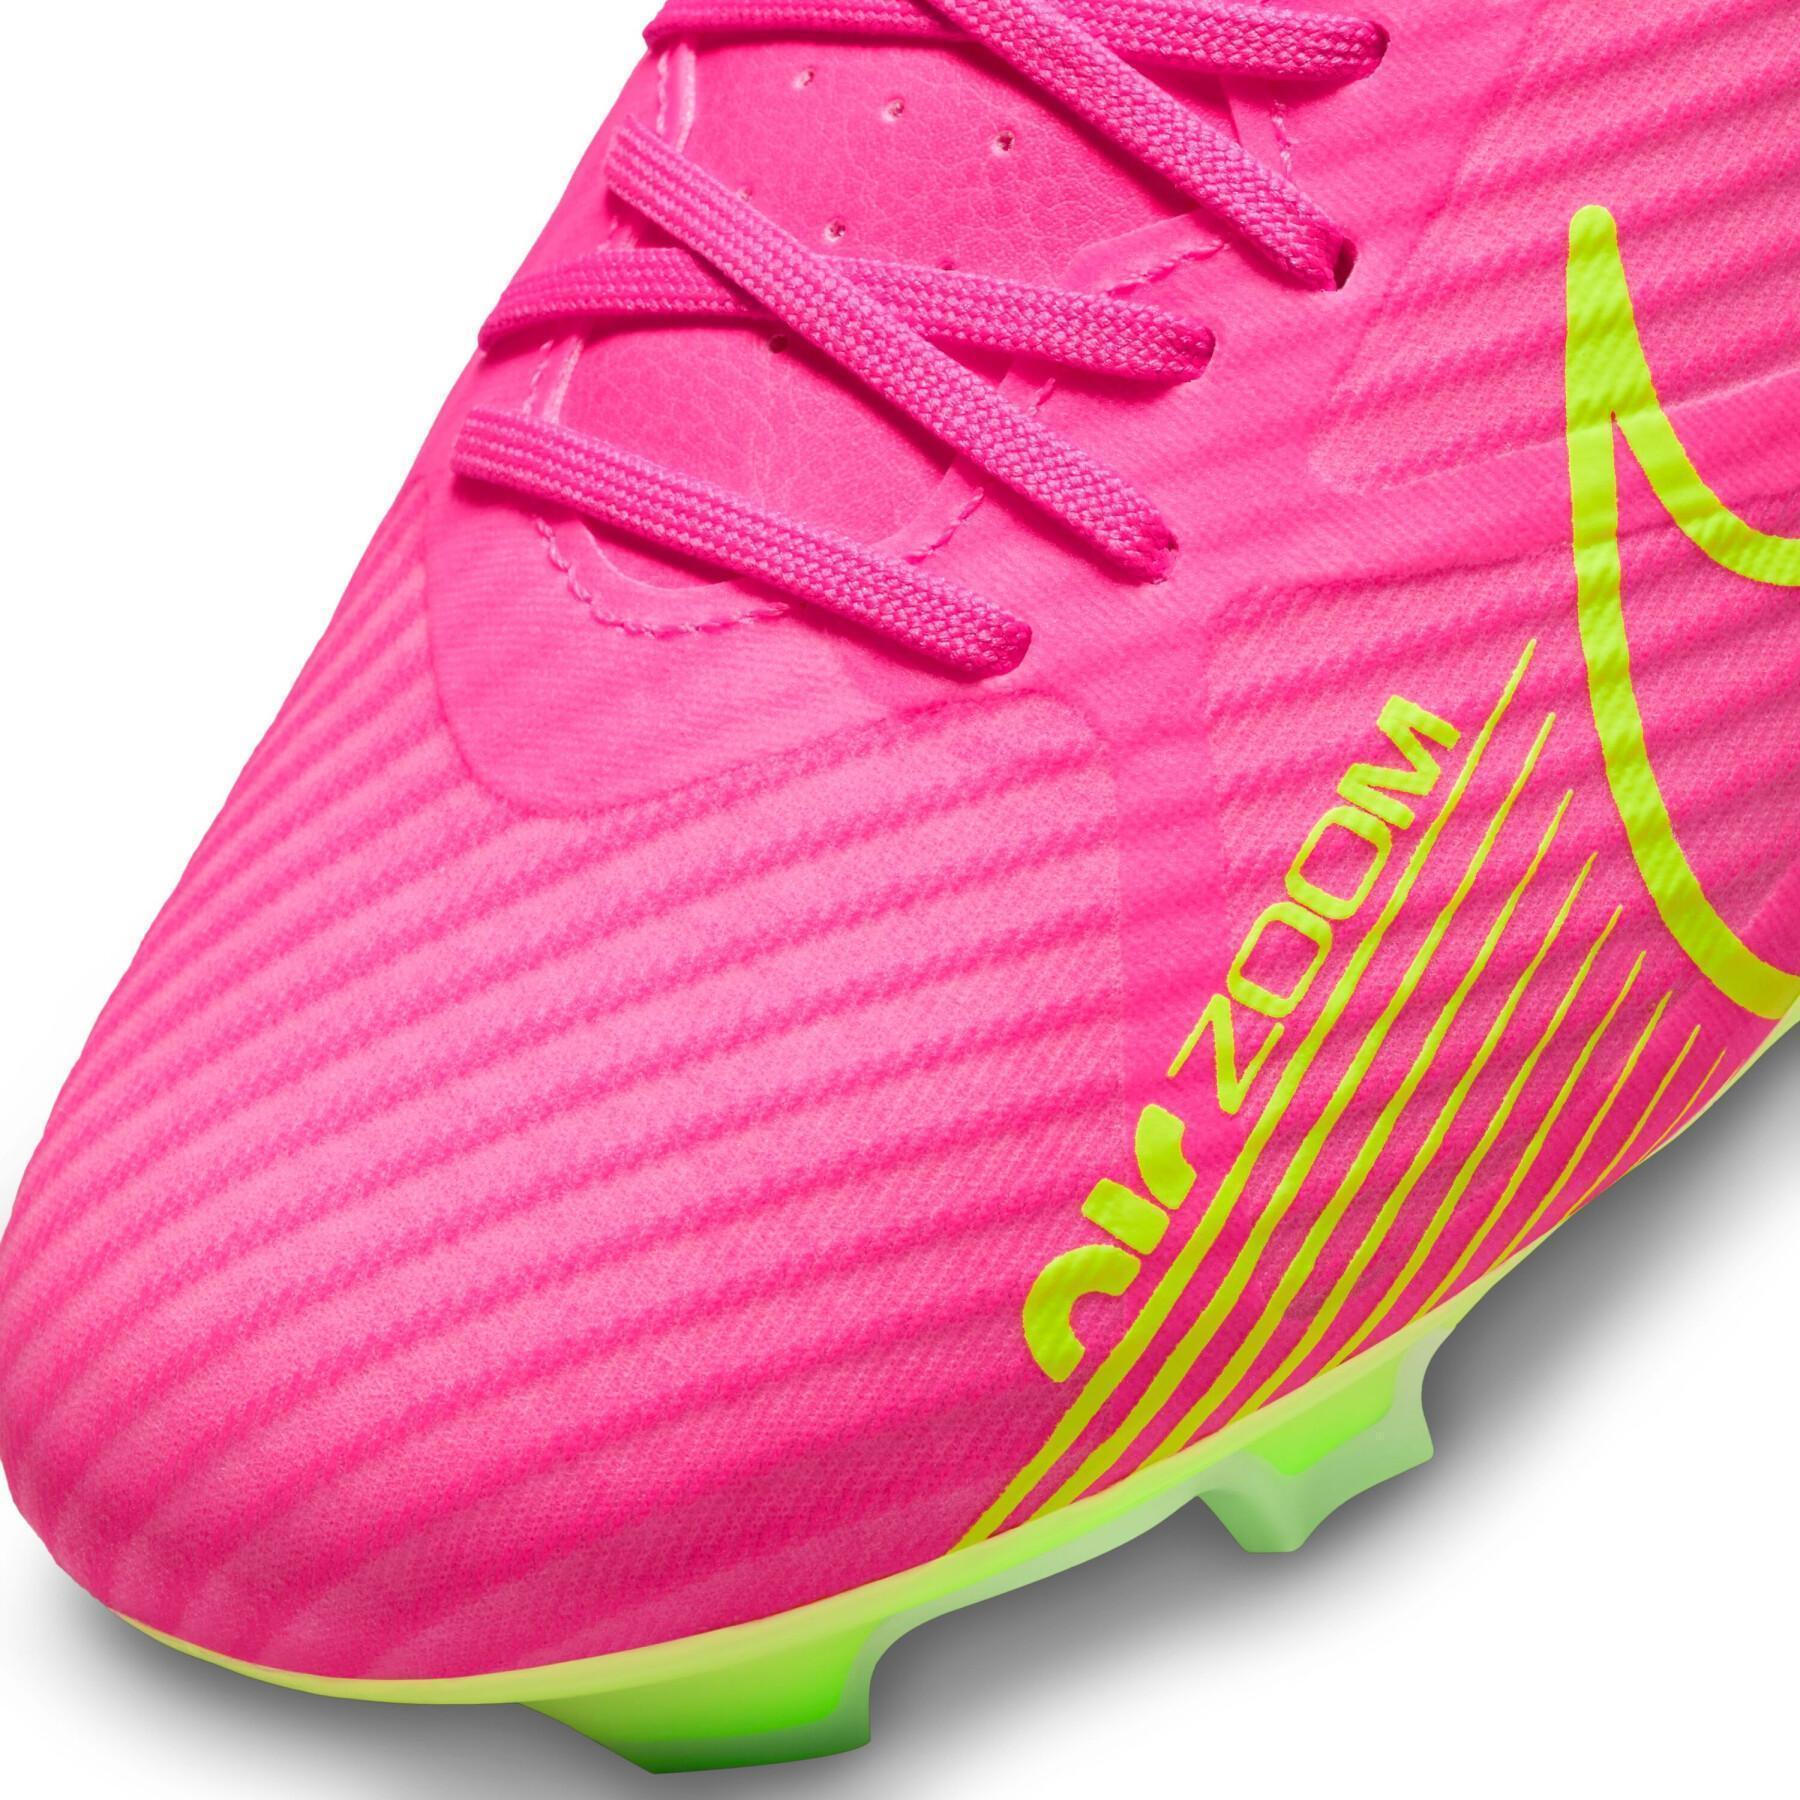 Soccer shoes Nike Zoom Mercurial Vapor 15 Academy MG - Luminious Pack